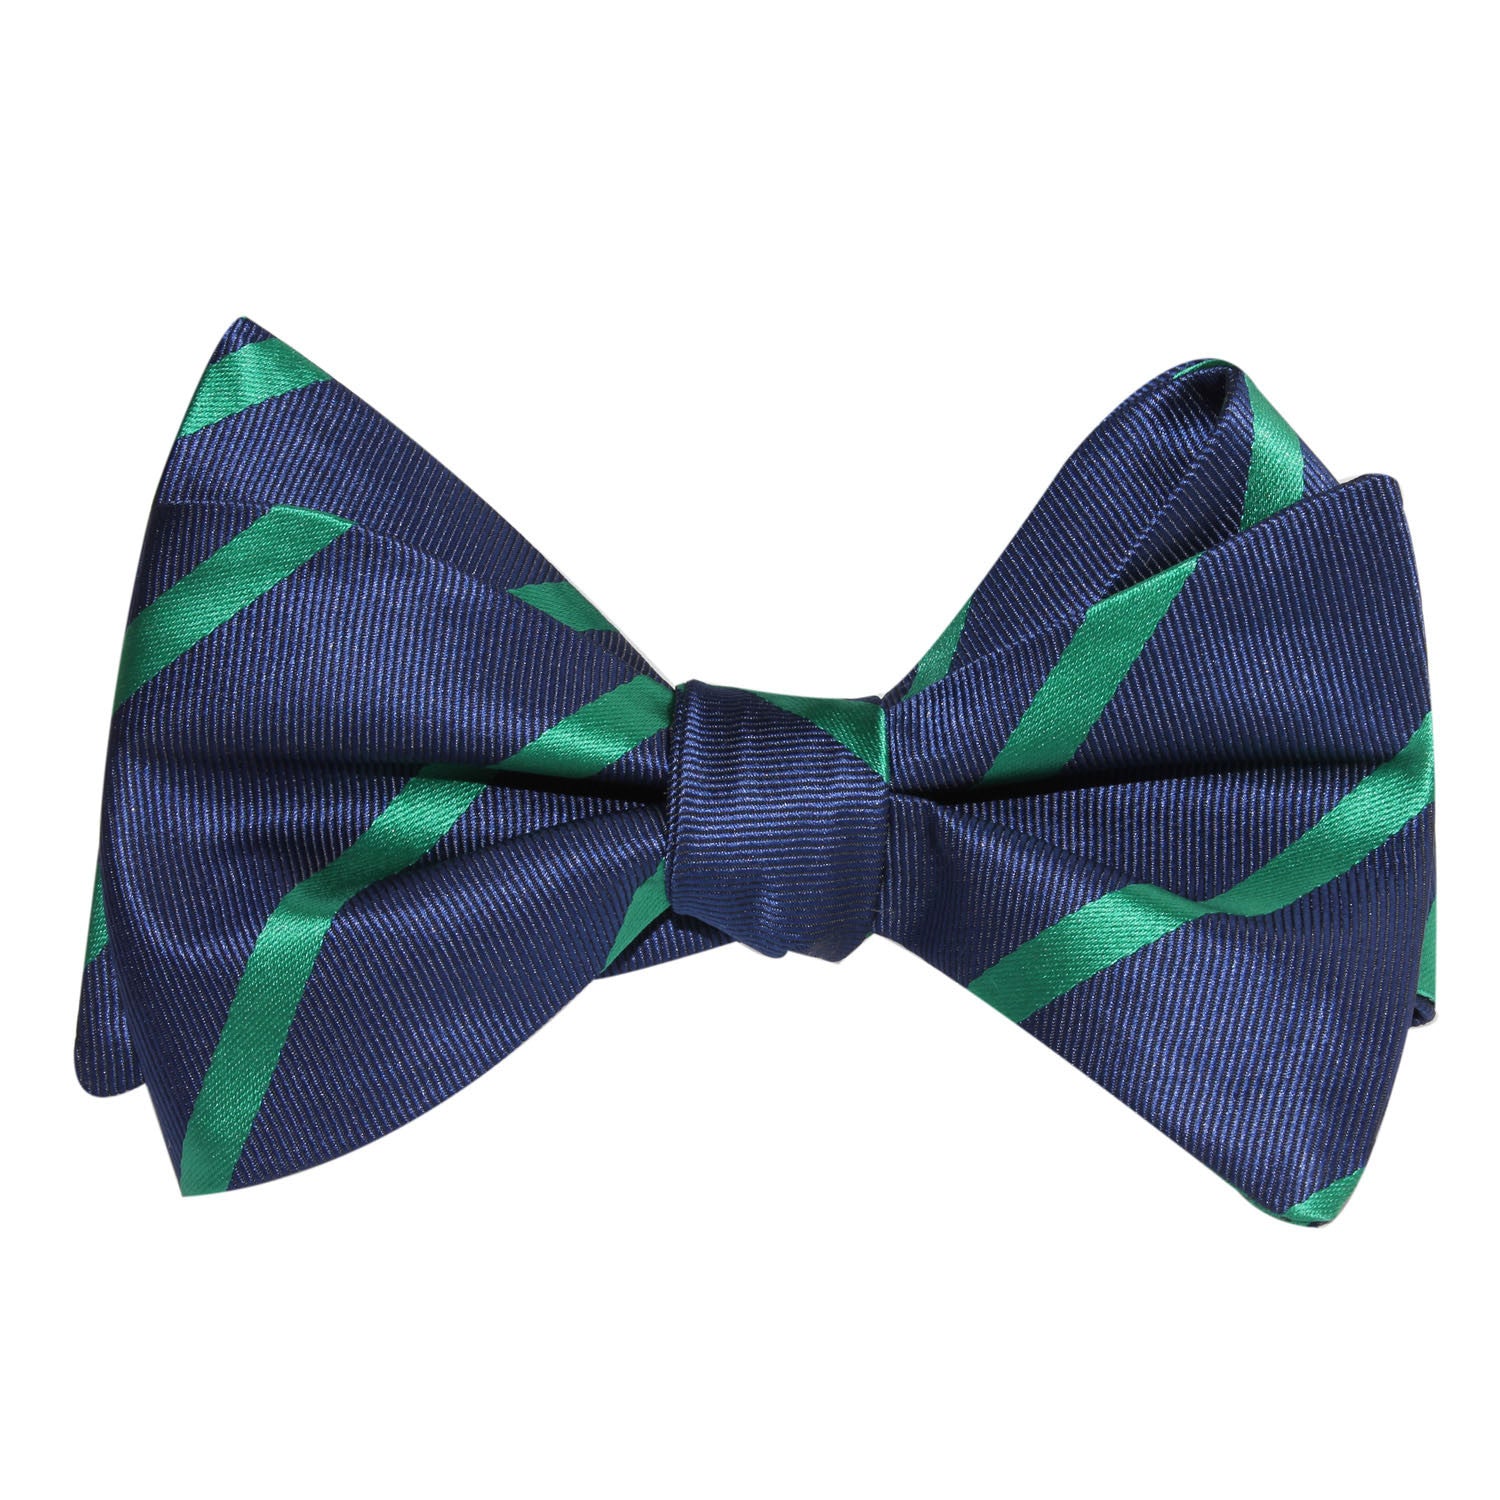 Navy Blue with Green Stripes Self Tie Bow Tie 1